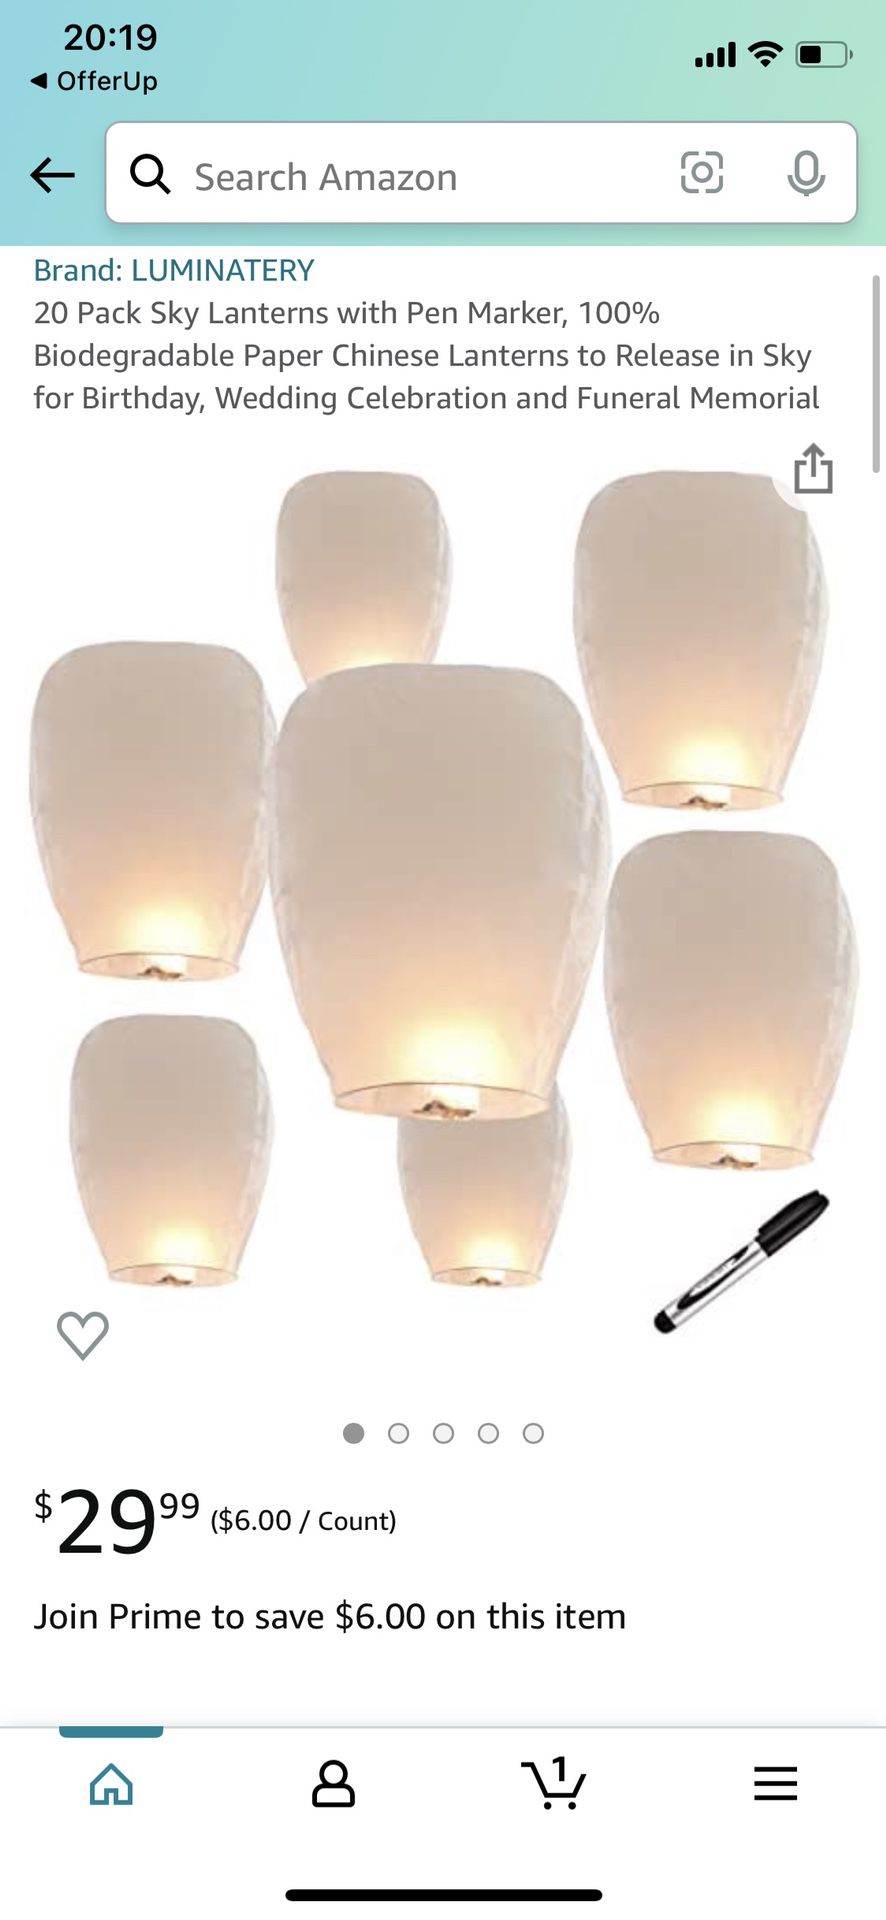 10 Pack Sky Lanterns with Pen Marker, 100% Biodegradable Paper Chinese Lanterns to Release in Sky for Birthday, Wedding Celebration and Funeral Memori